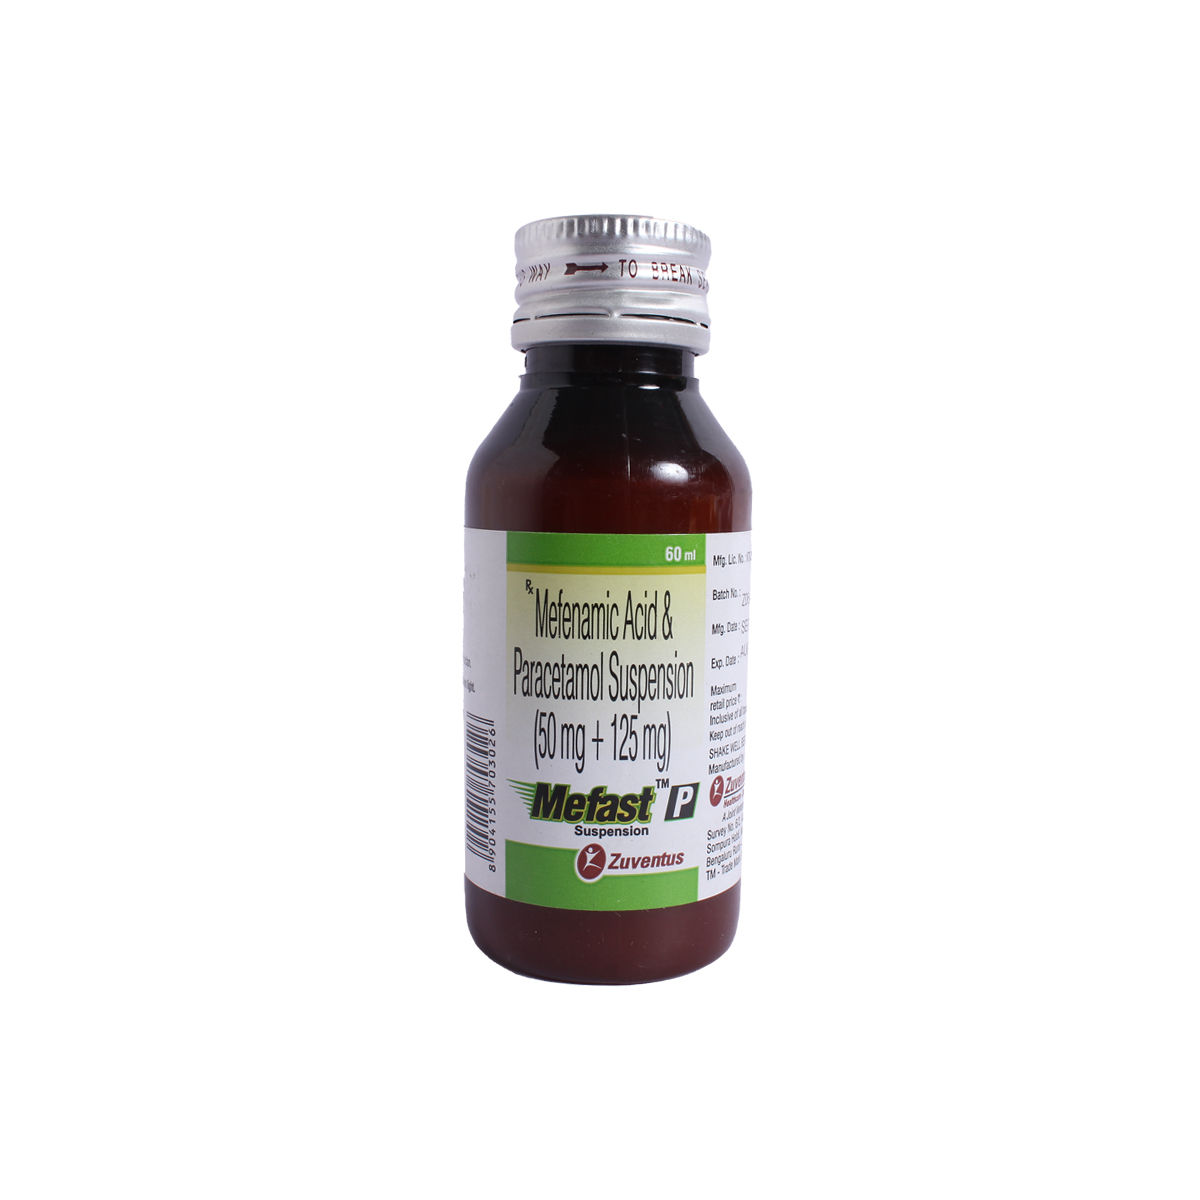 Mefast P Syrup 60 ml Price, Uses, Side Effects, Composition - Apollo